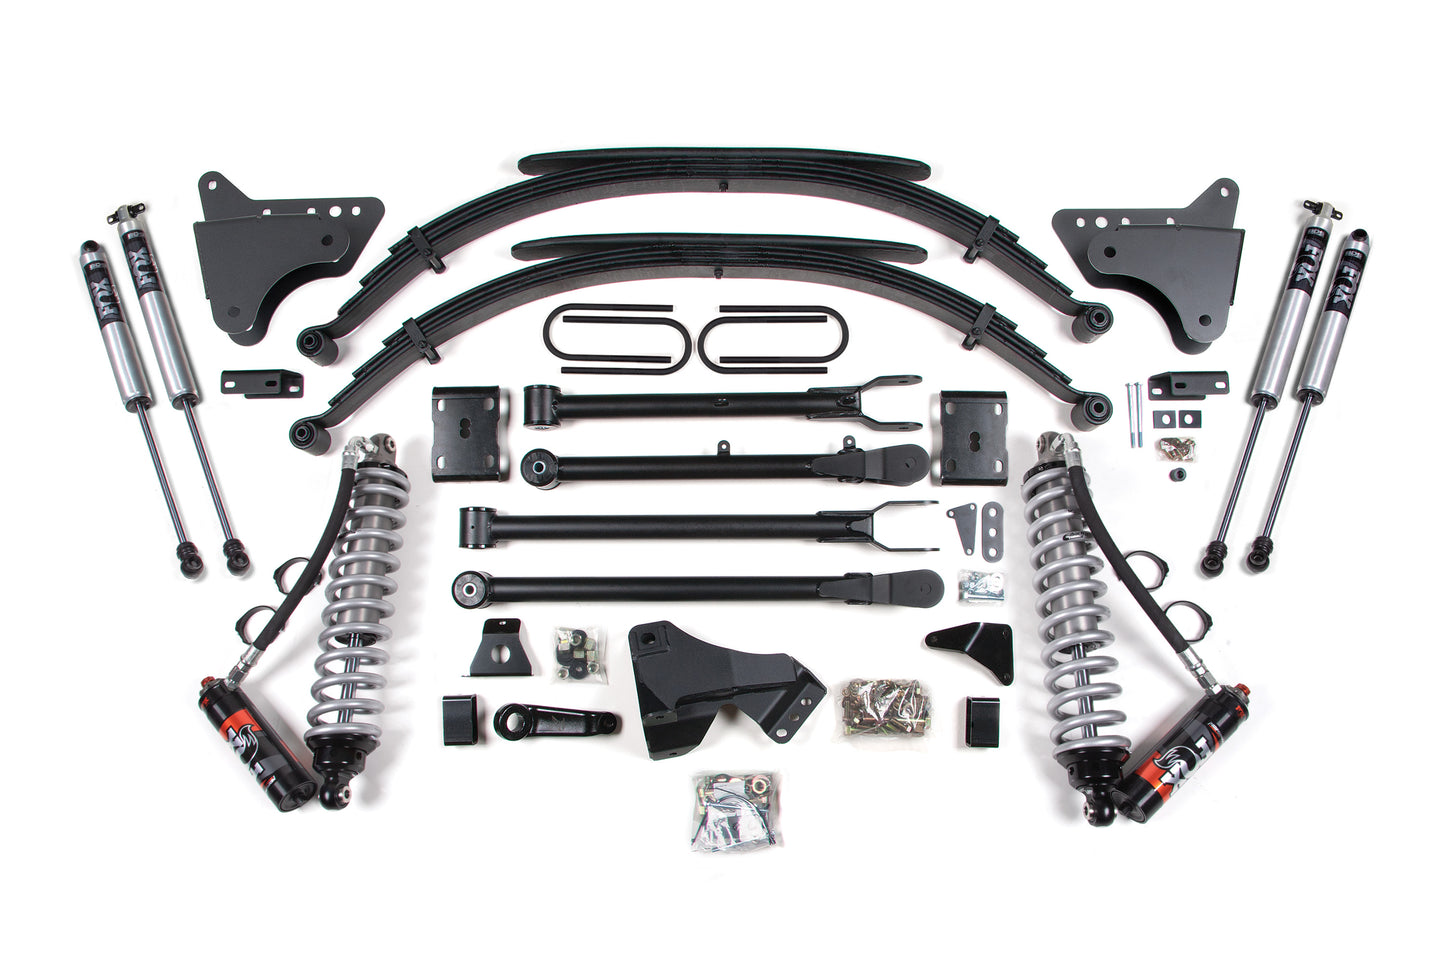 4 Inch Lift Kit W/ 4-Link - FOX 2.5 Performance Elite Coil-Over Conversion - Ford F250/F350 Super Duty (11-16) 4WD - Diesel